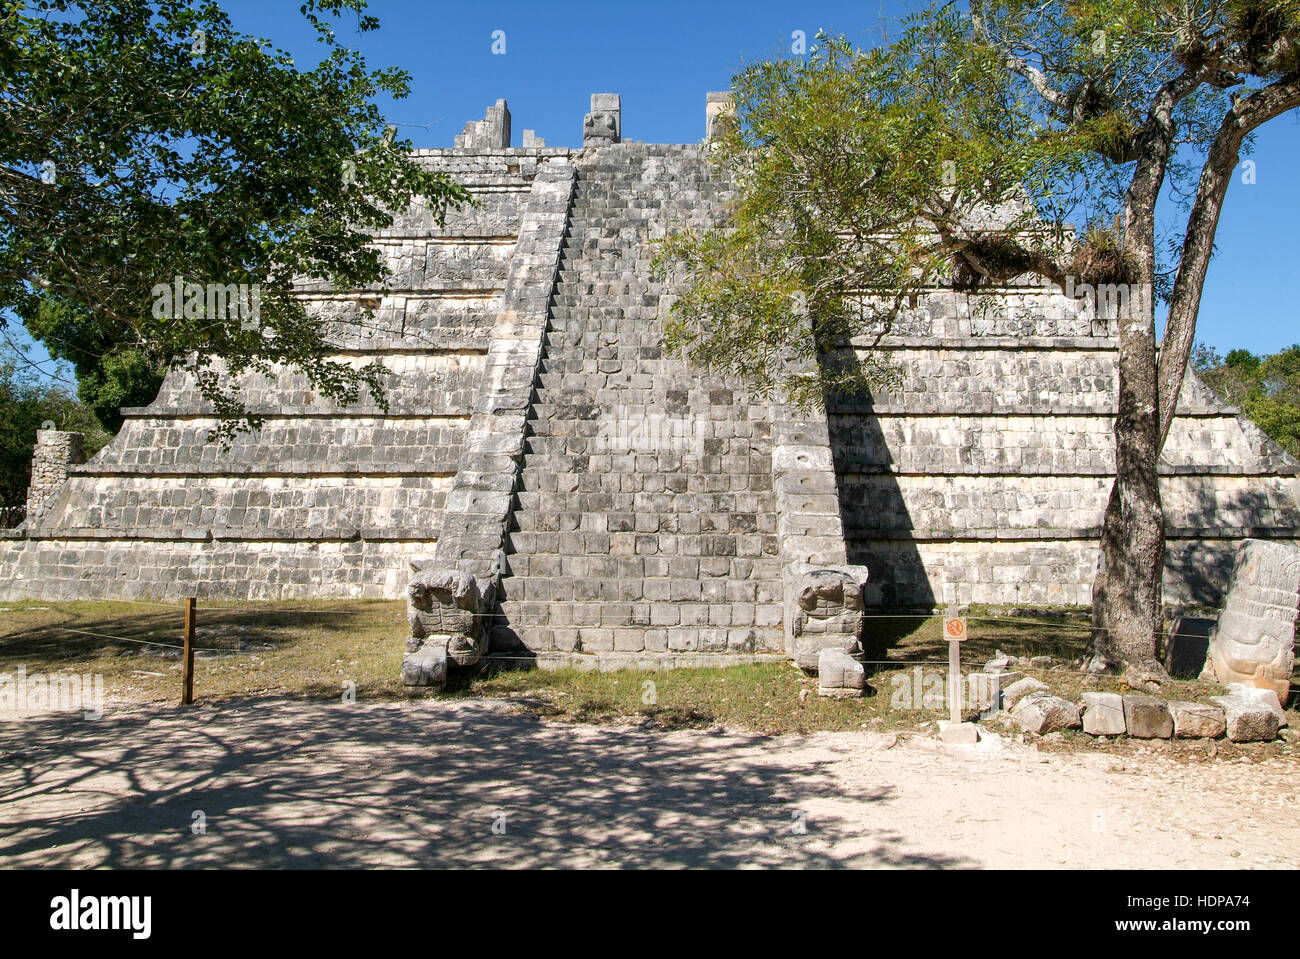 Mayan pyramid at the archaeological site of Chichen Itza, Mexico Stock Photo